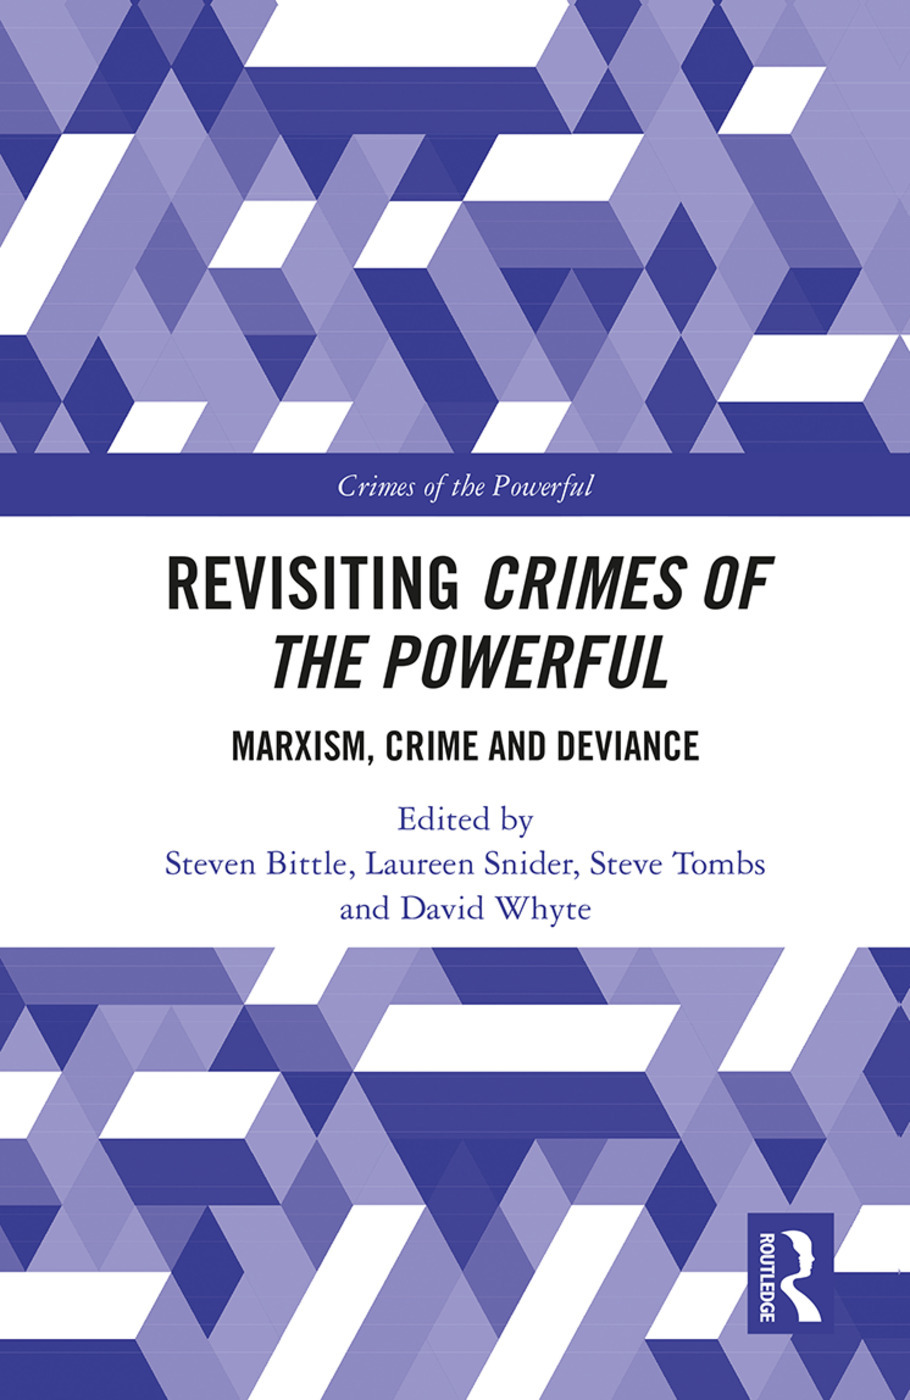 Book cover of "Revisiting Crimes of the Powerful"